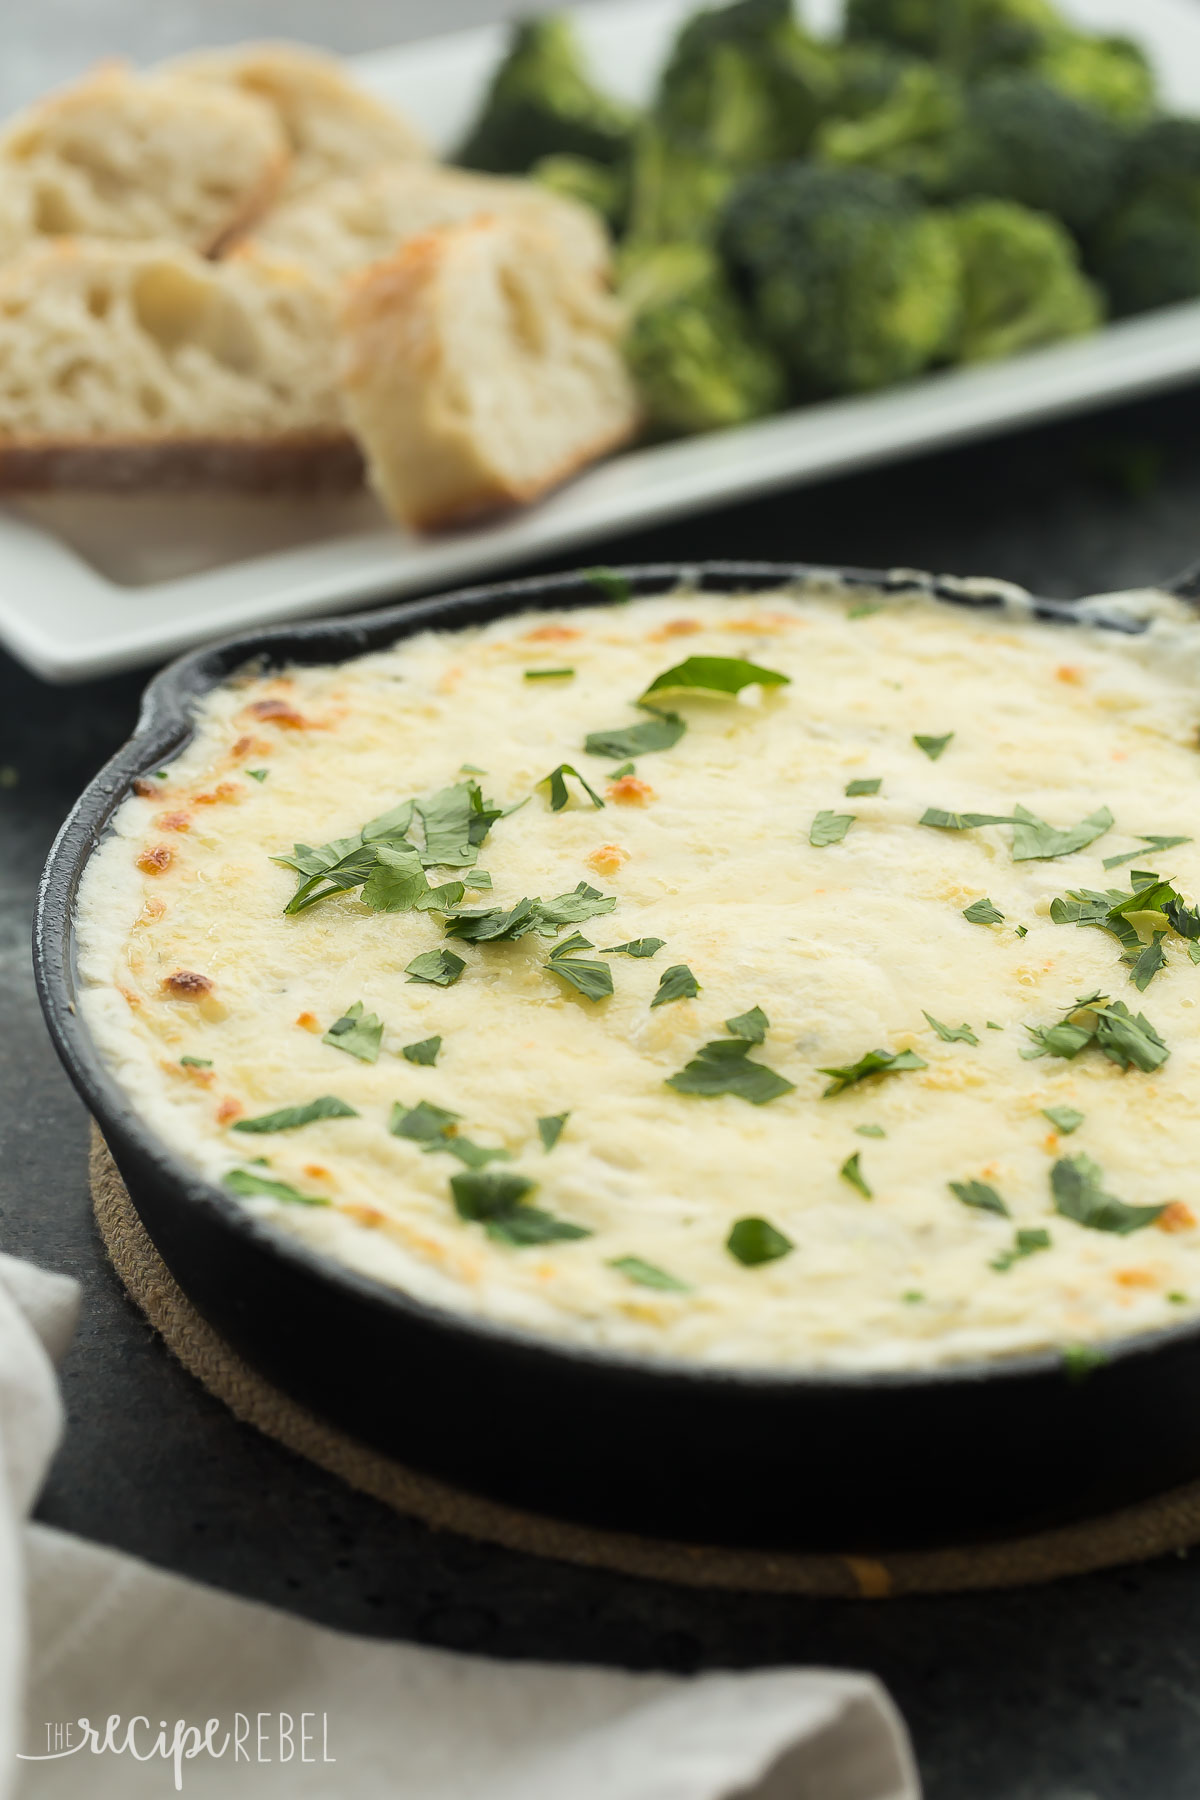 This Chicken Alfredo Dip is out of this world! It’s creamy, cheesy, loaded with chicken and made from scratch! Perfect as an appetizer or a casual lunch or dinner.